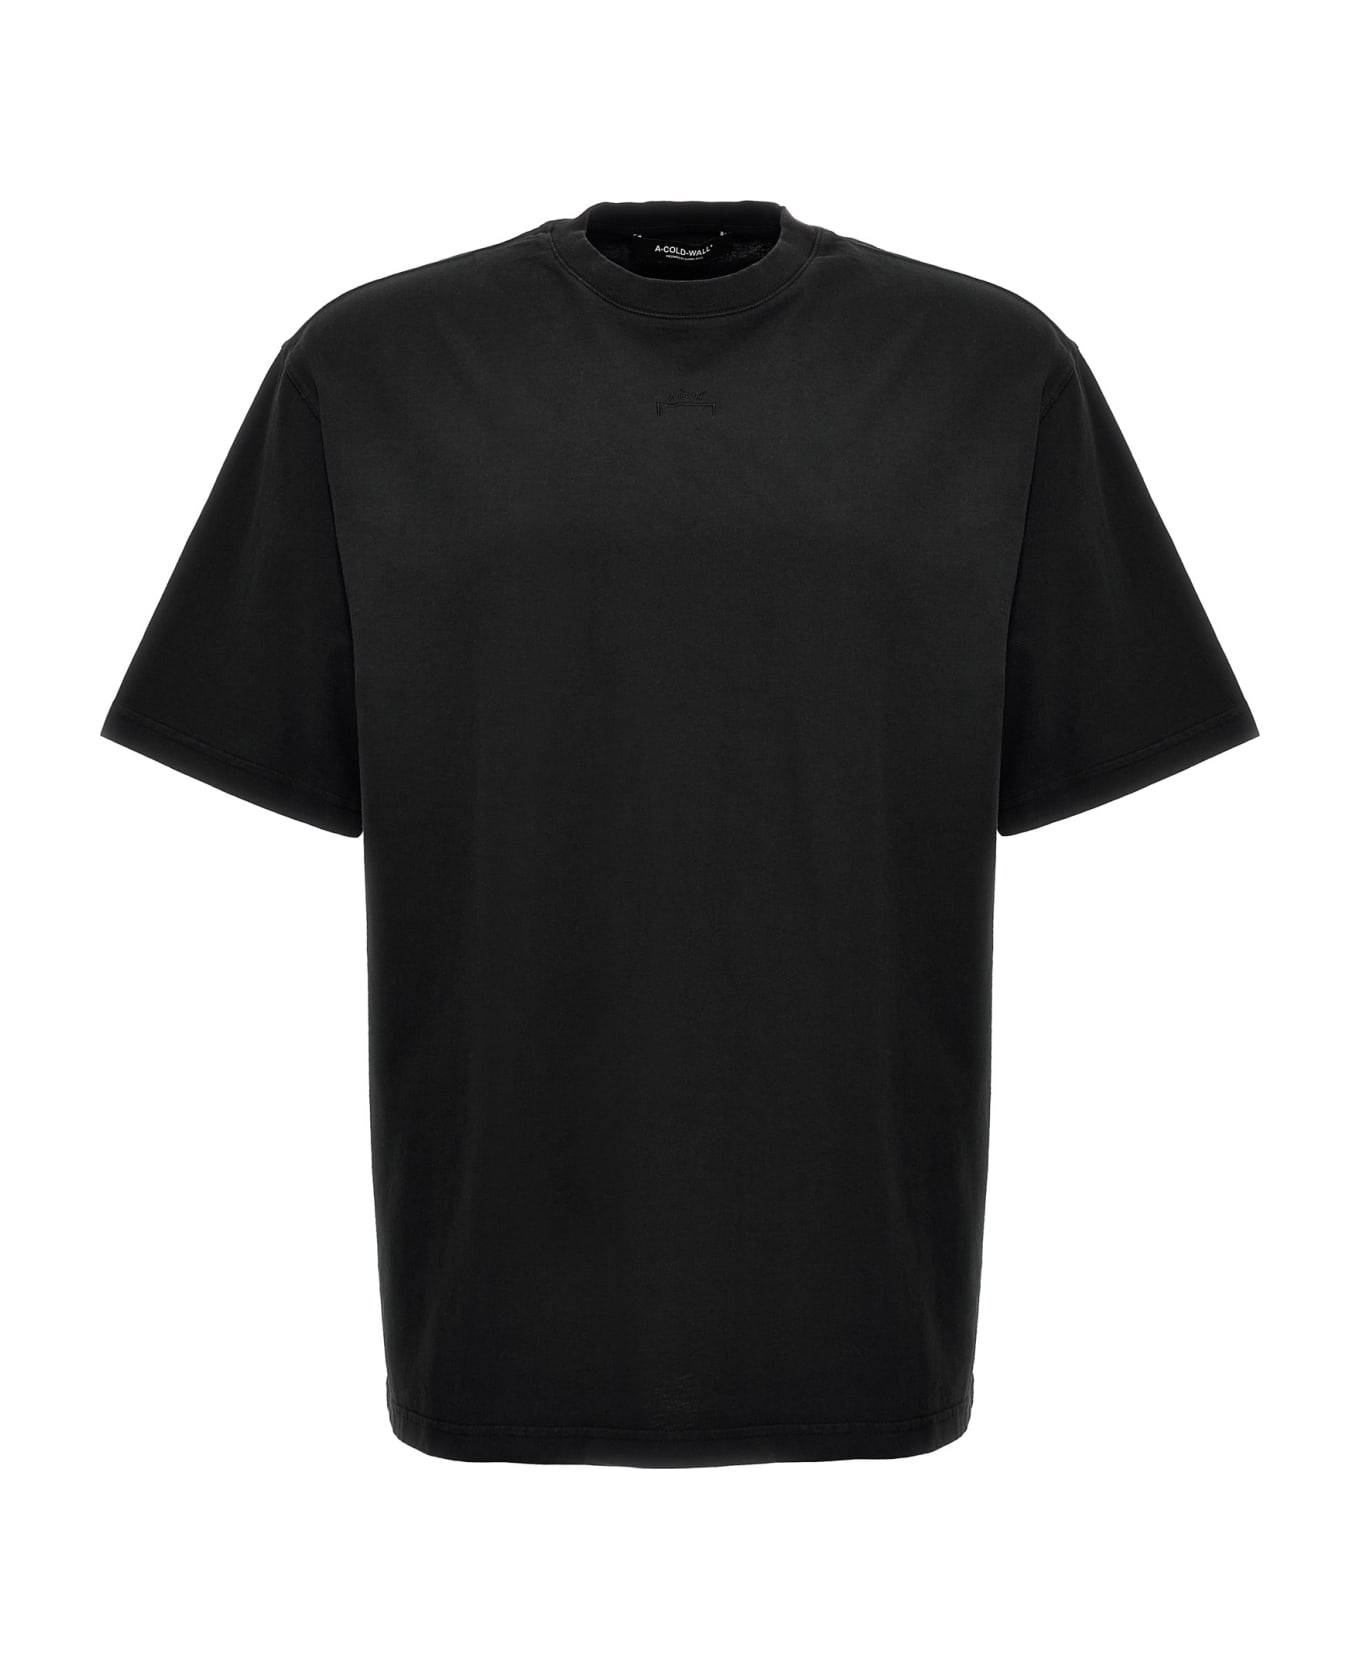 A-COLD-WALL 'essential' T-shirt - Black  